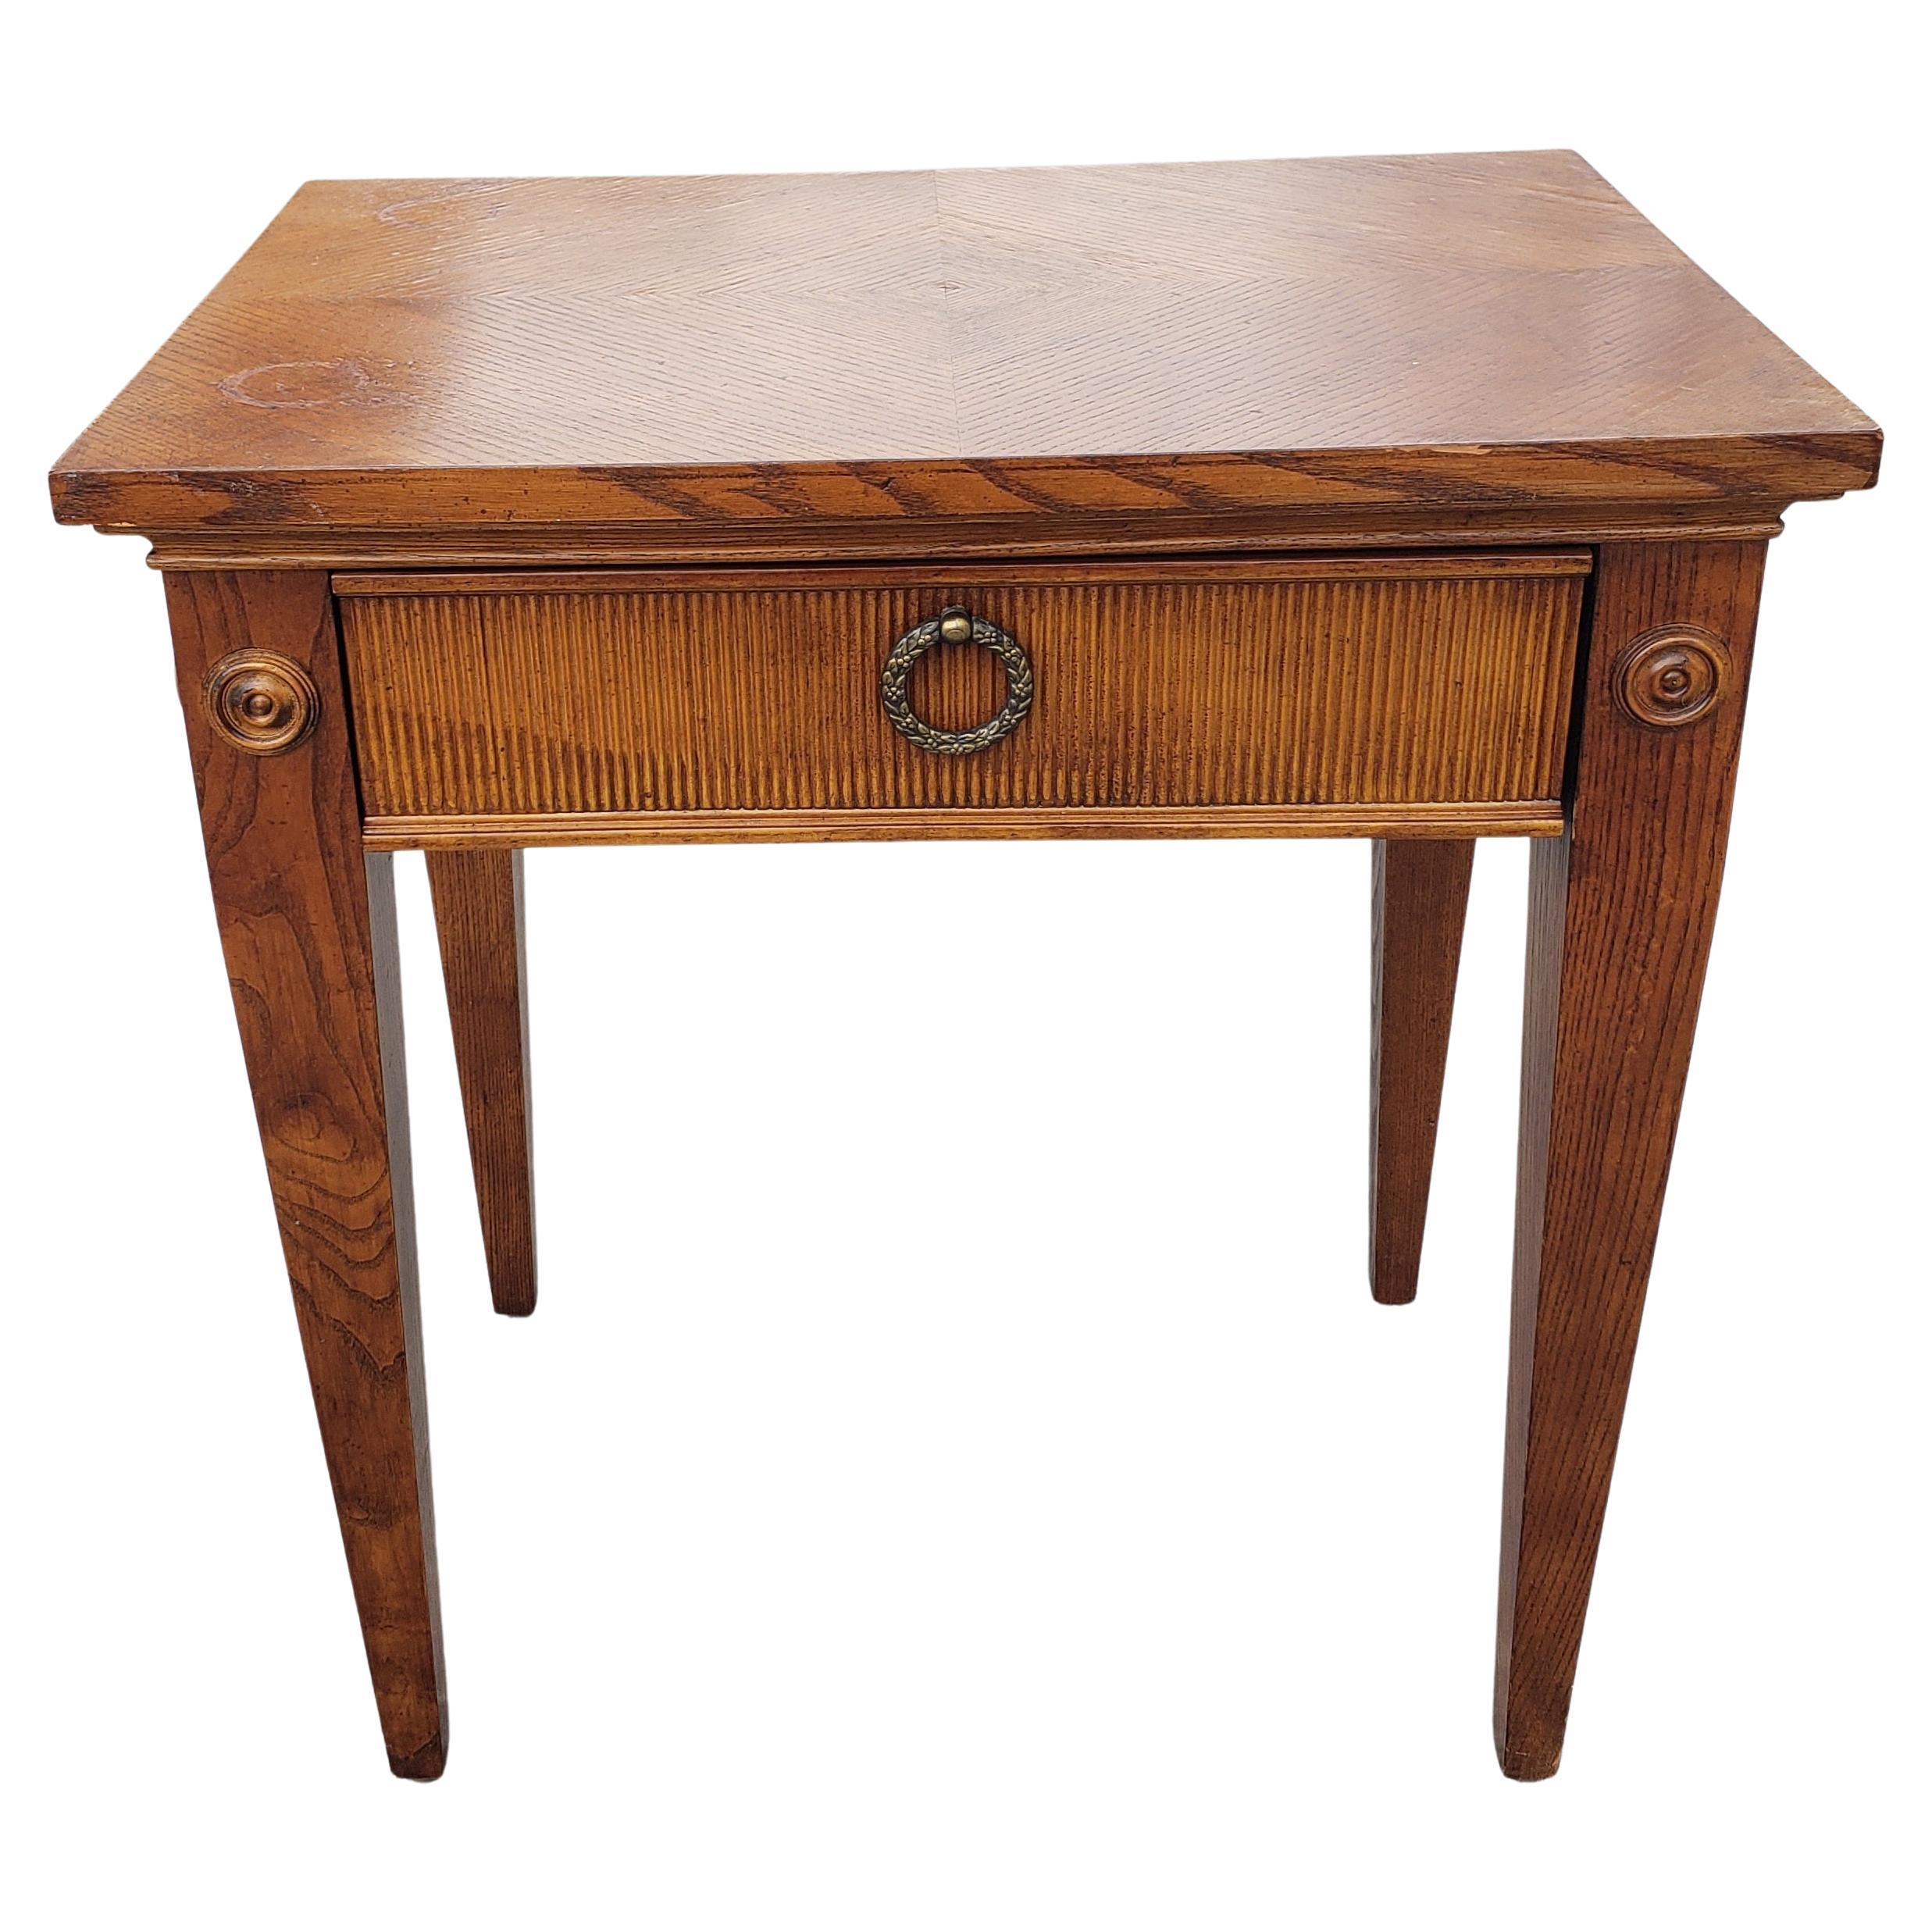 Lane furniture fruitwood one-drawer side table with tapered legs. 
Measures 24